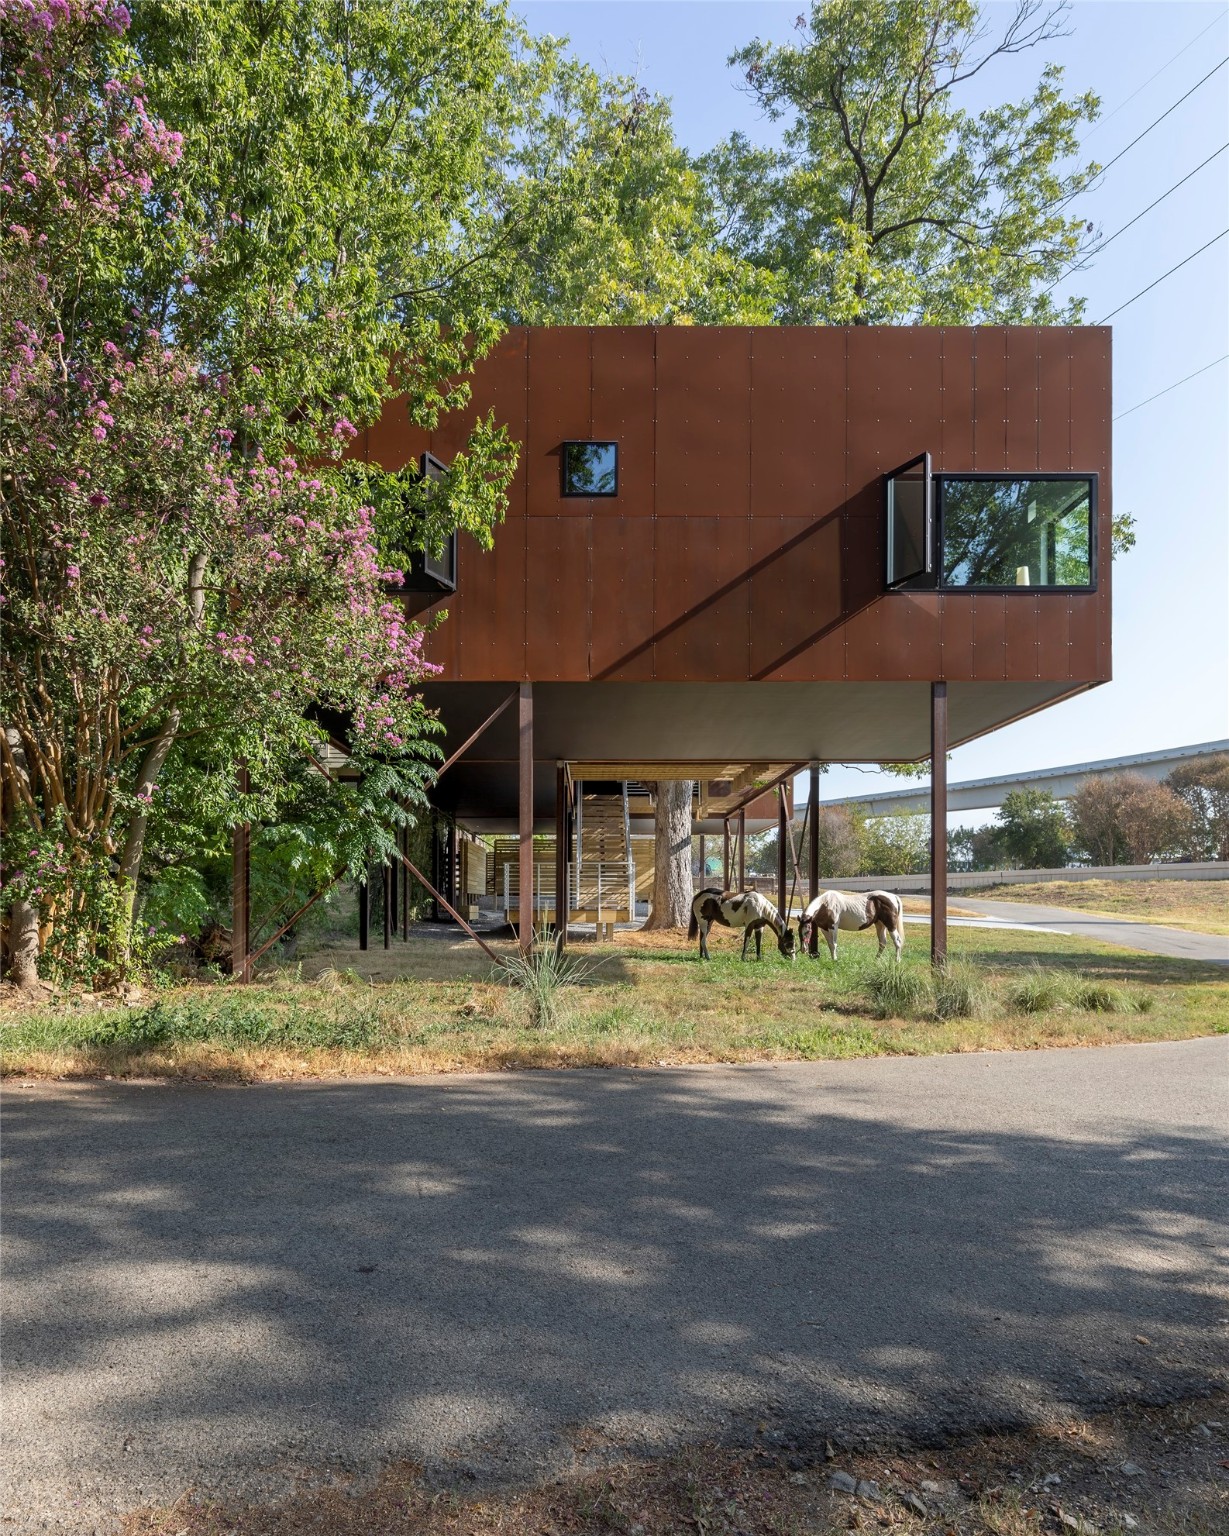 Strasser designed the home with two cantilevered wings separated by a central link. One wing is public including the kitchen and living room, the other private with two bedrooms, both featuring an ensuite bath and closet.